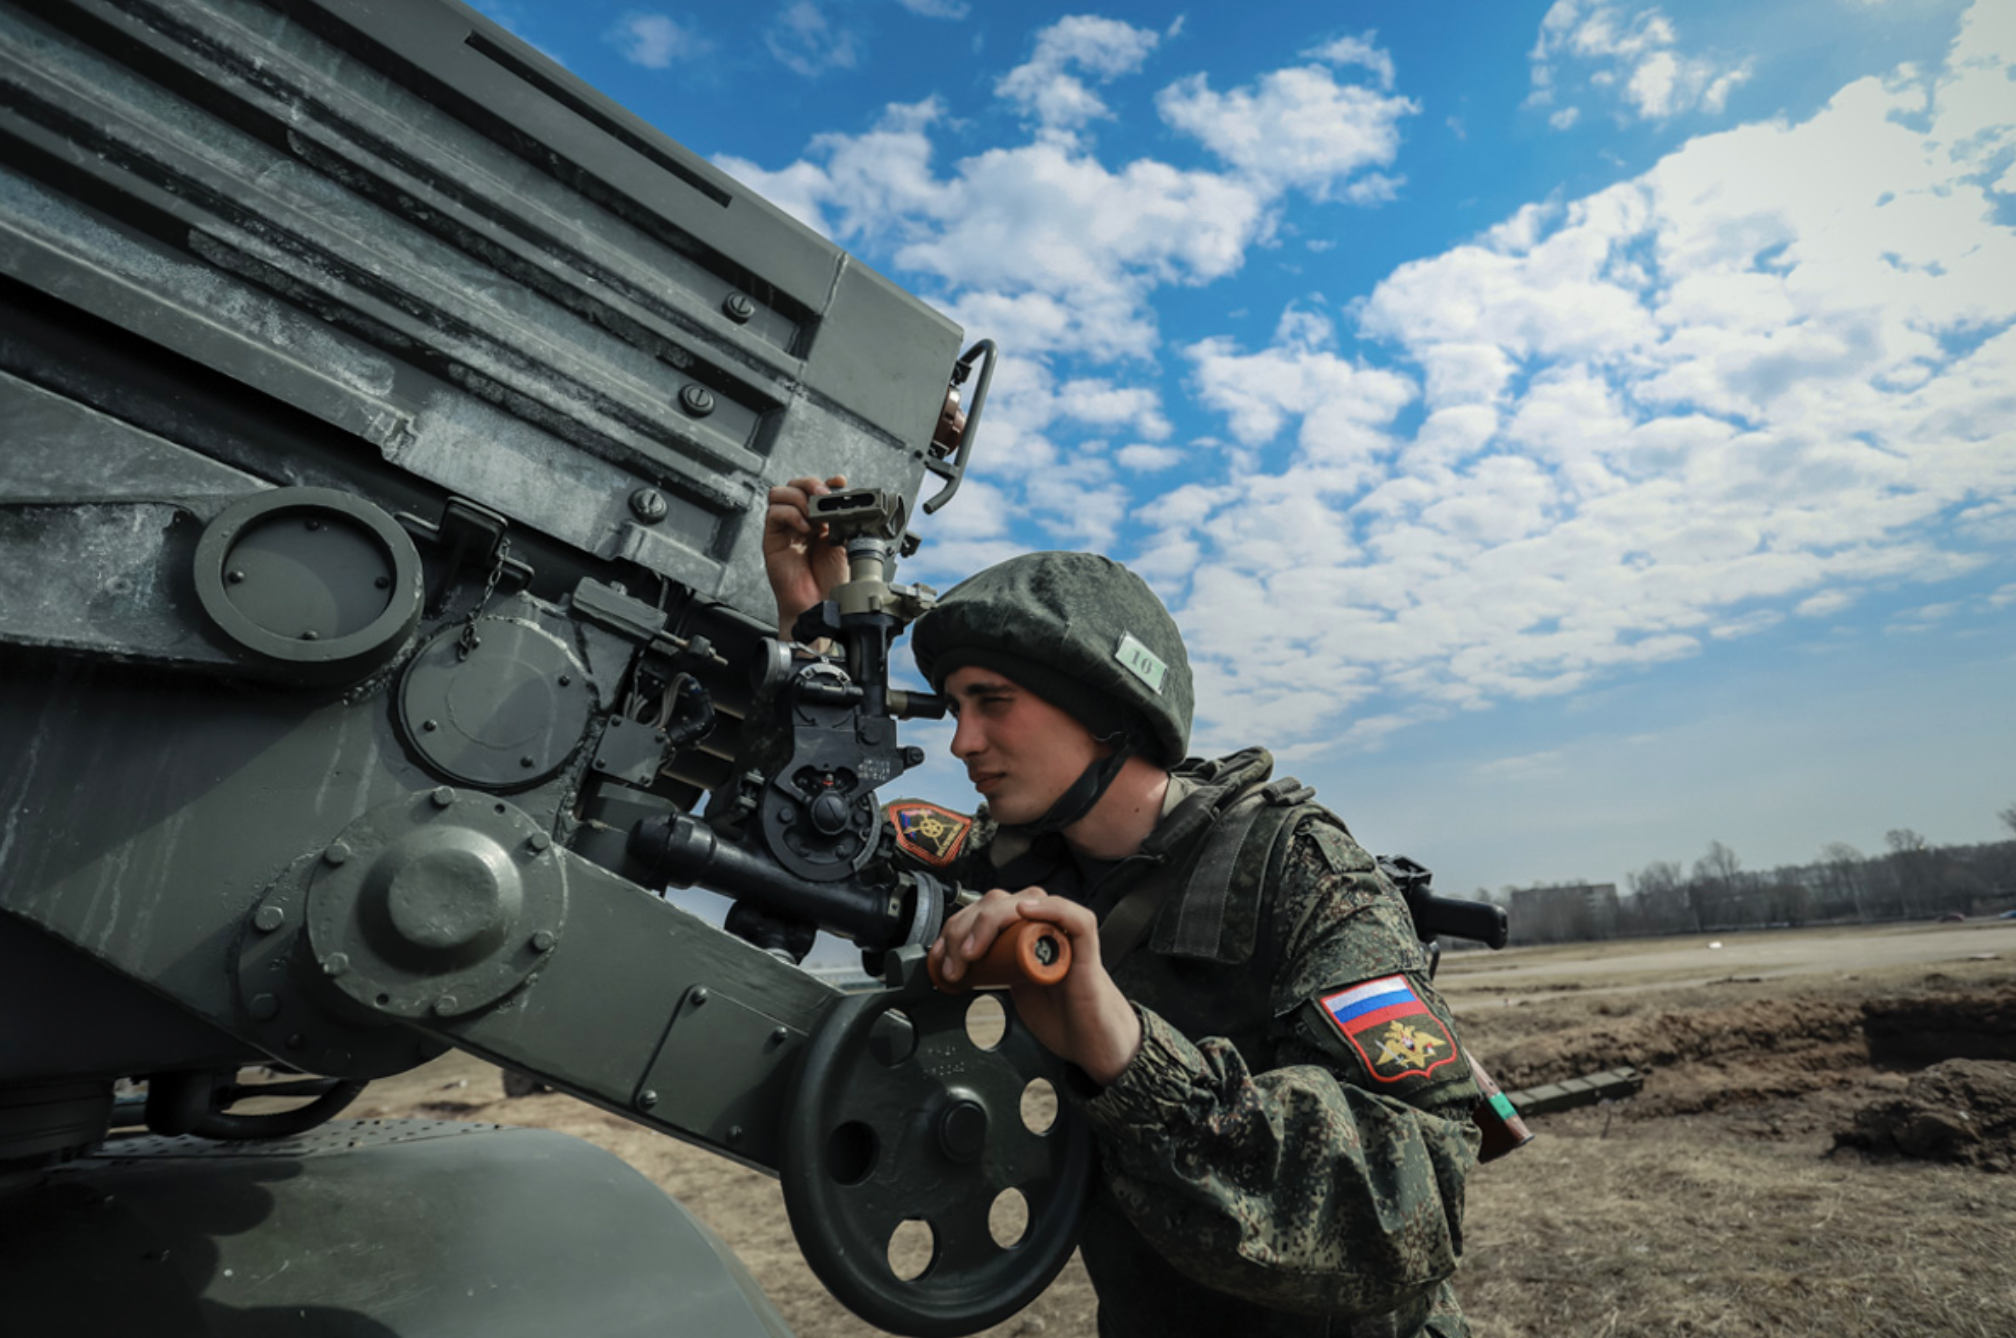 Tensions Between Russia and Ukraine: How Likely is Another War?